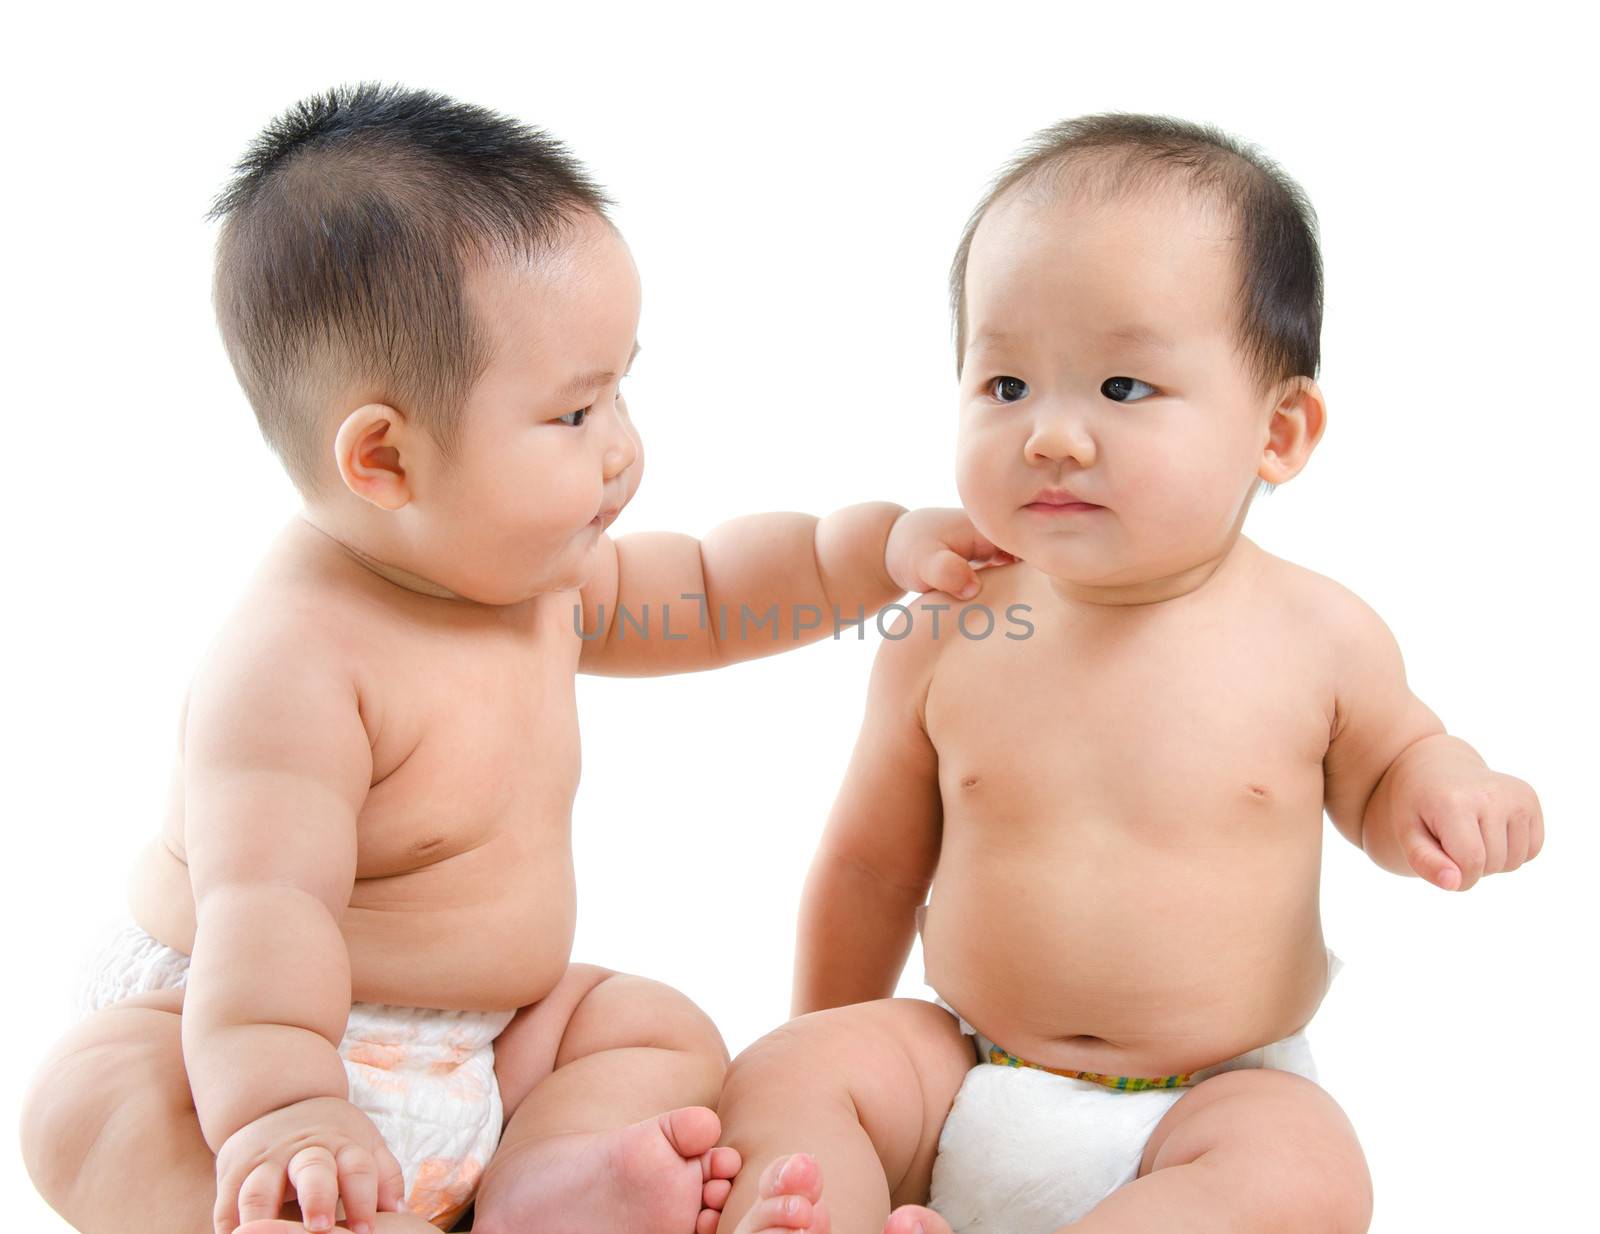 Two Asian babies having baby talk, sitting isolated over white background.